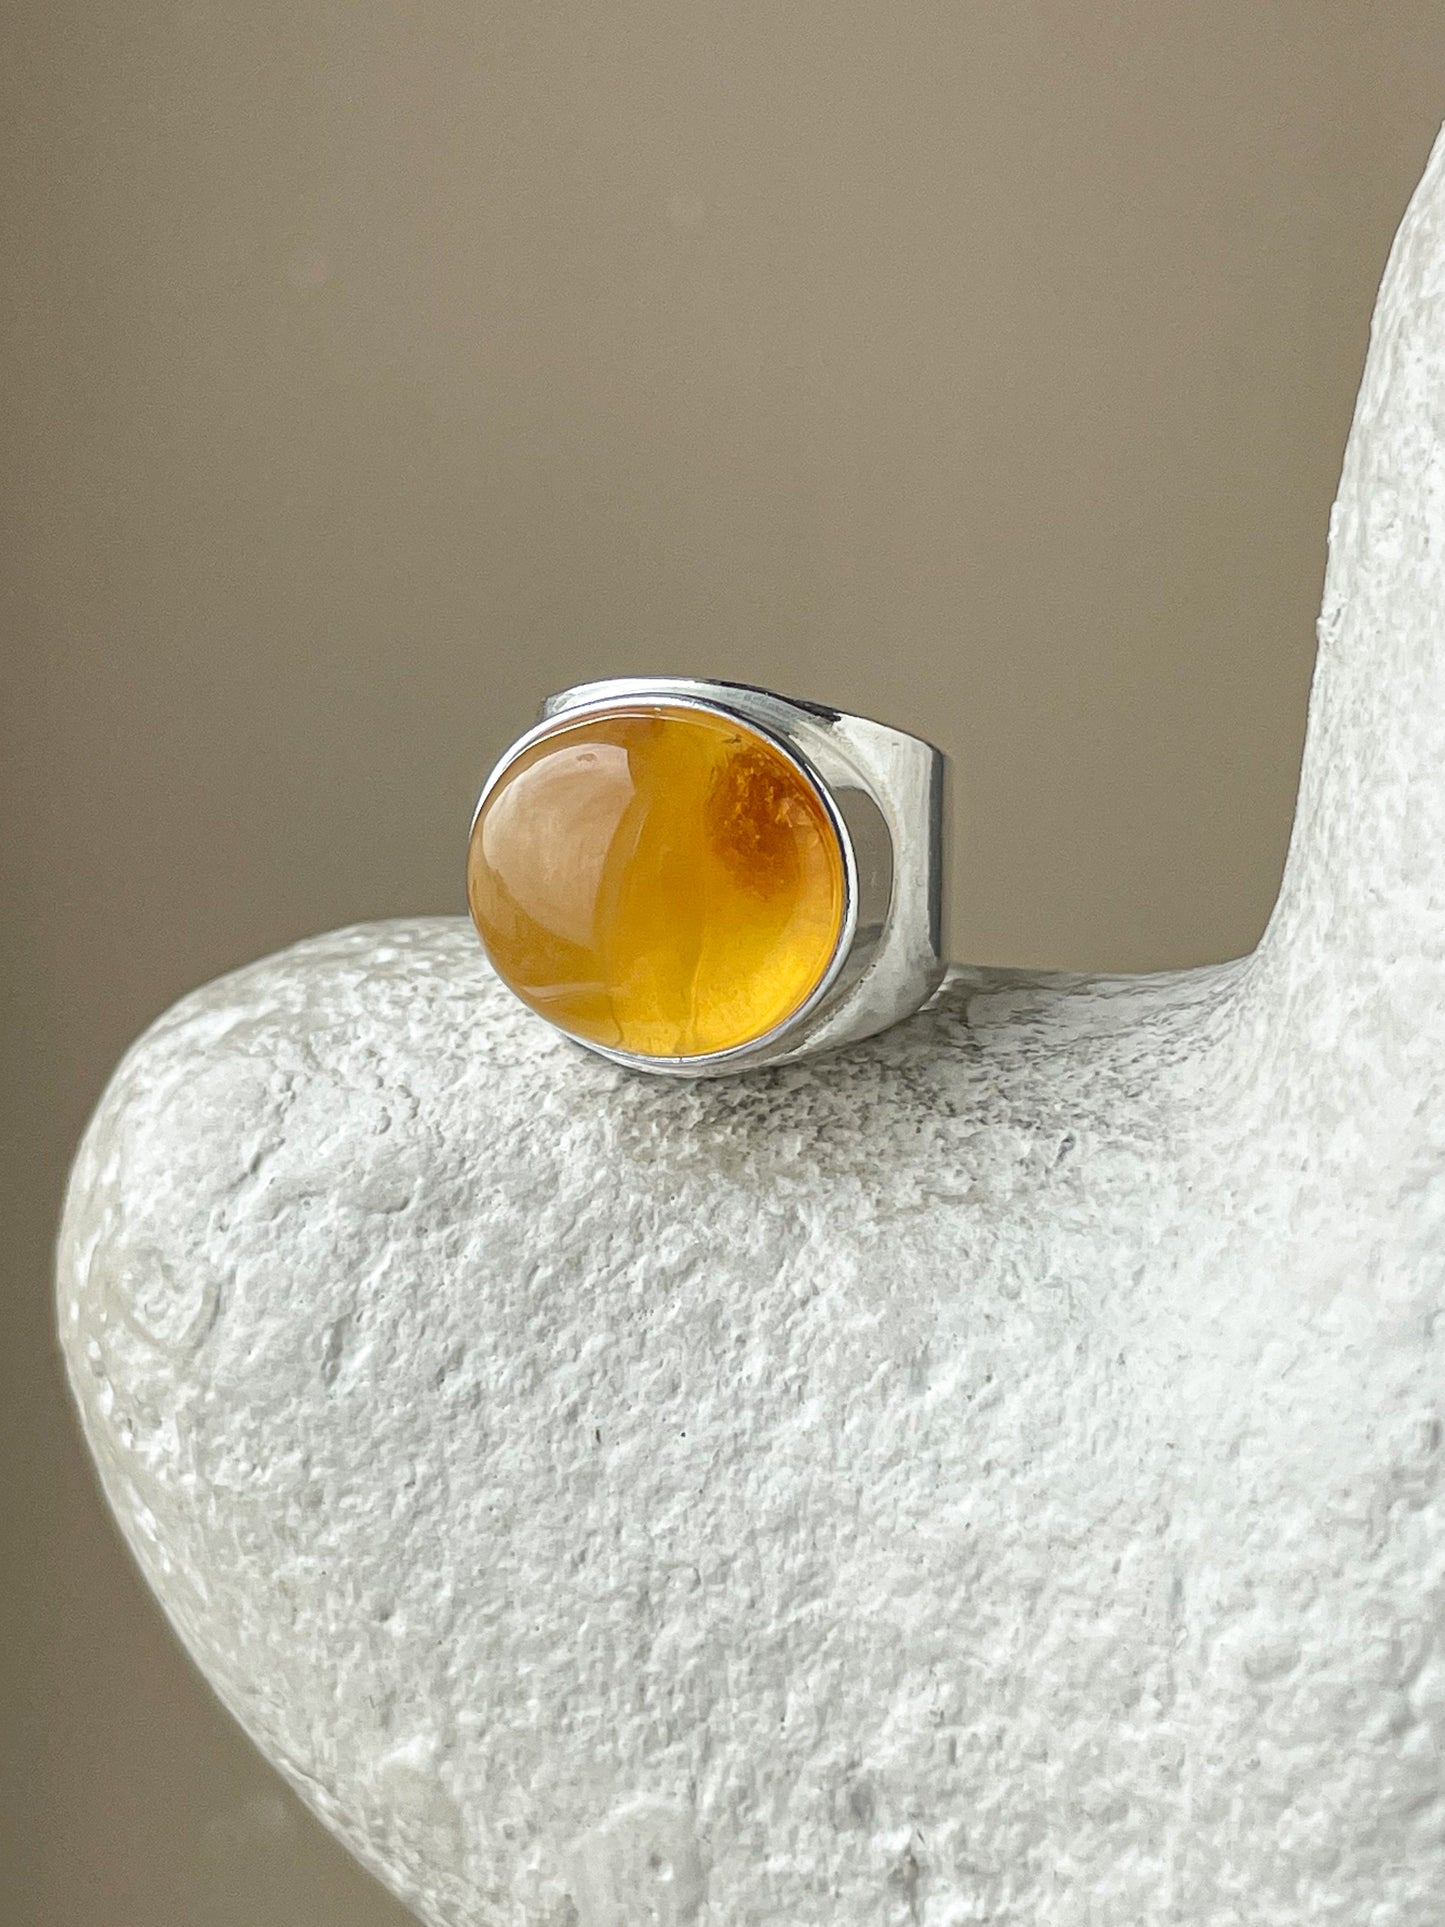 Honey amber ring - Sterling silver - Statement ring collection - Size 6